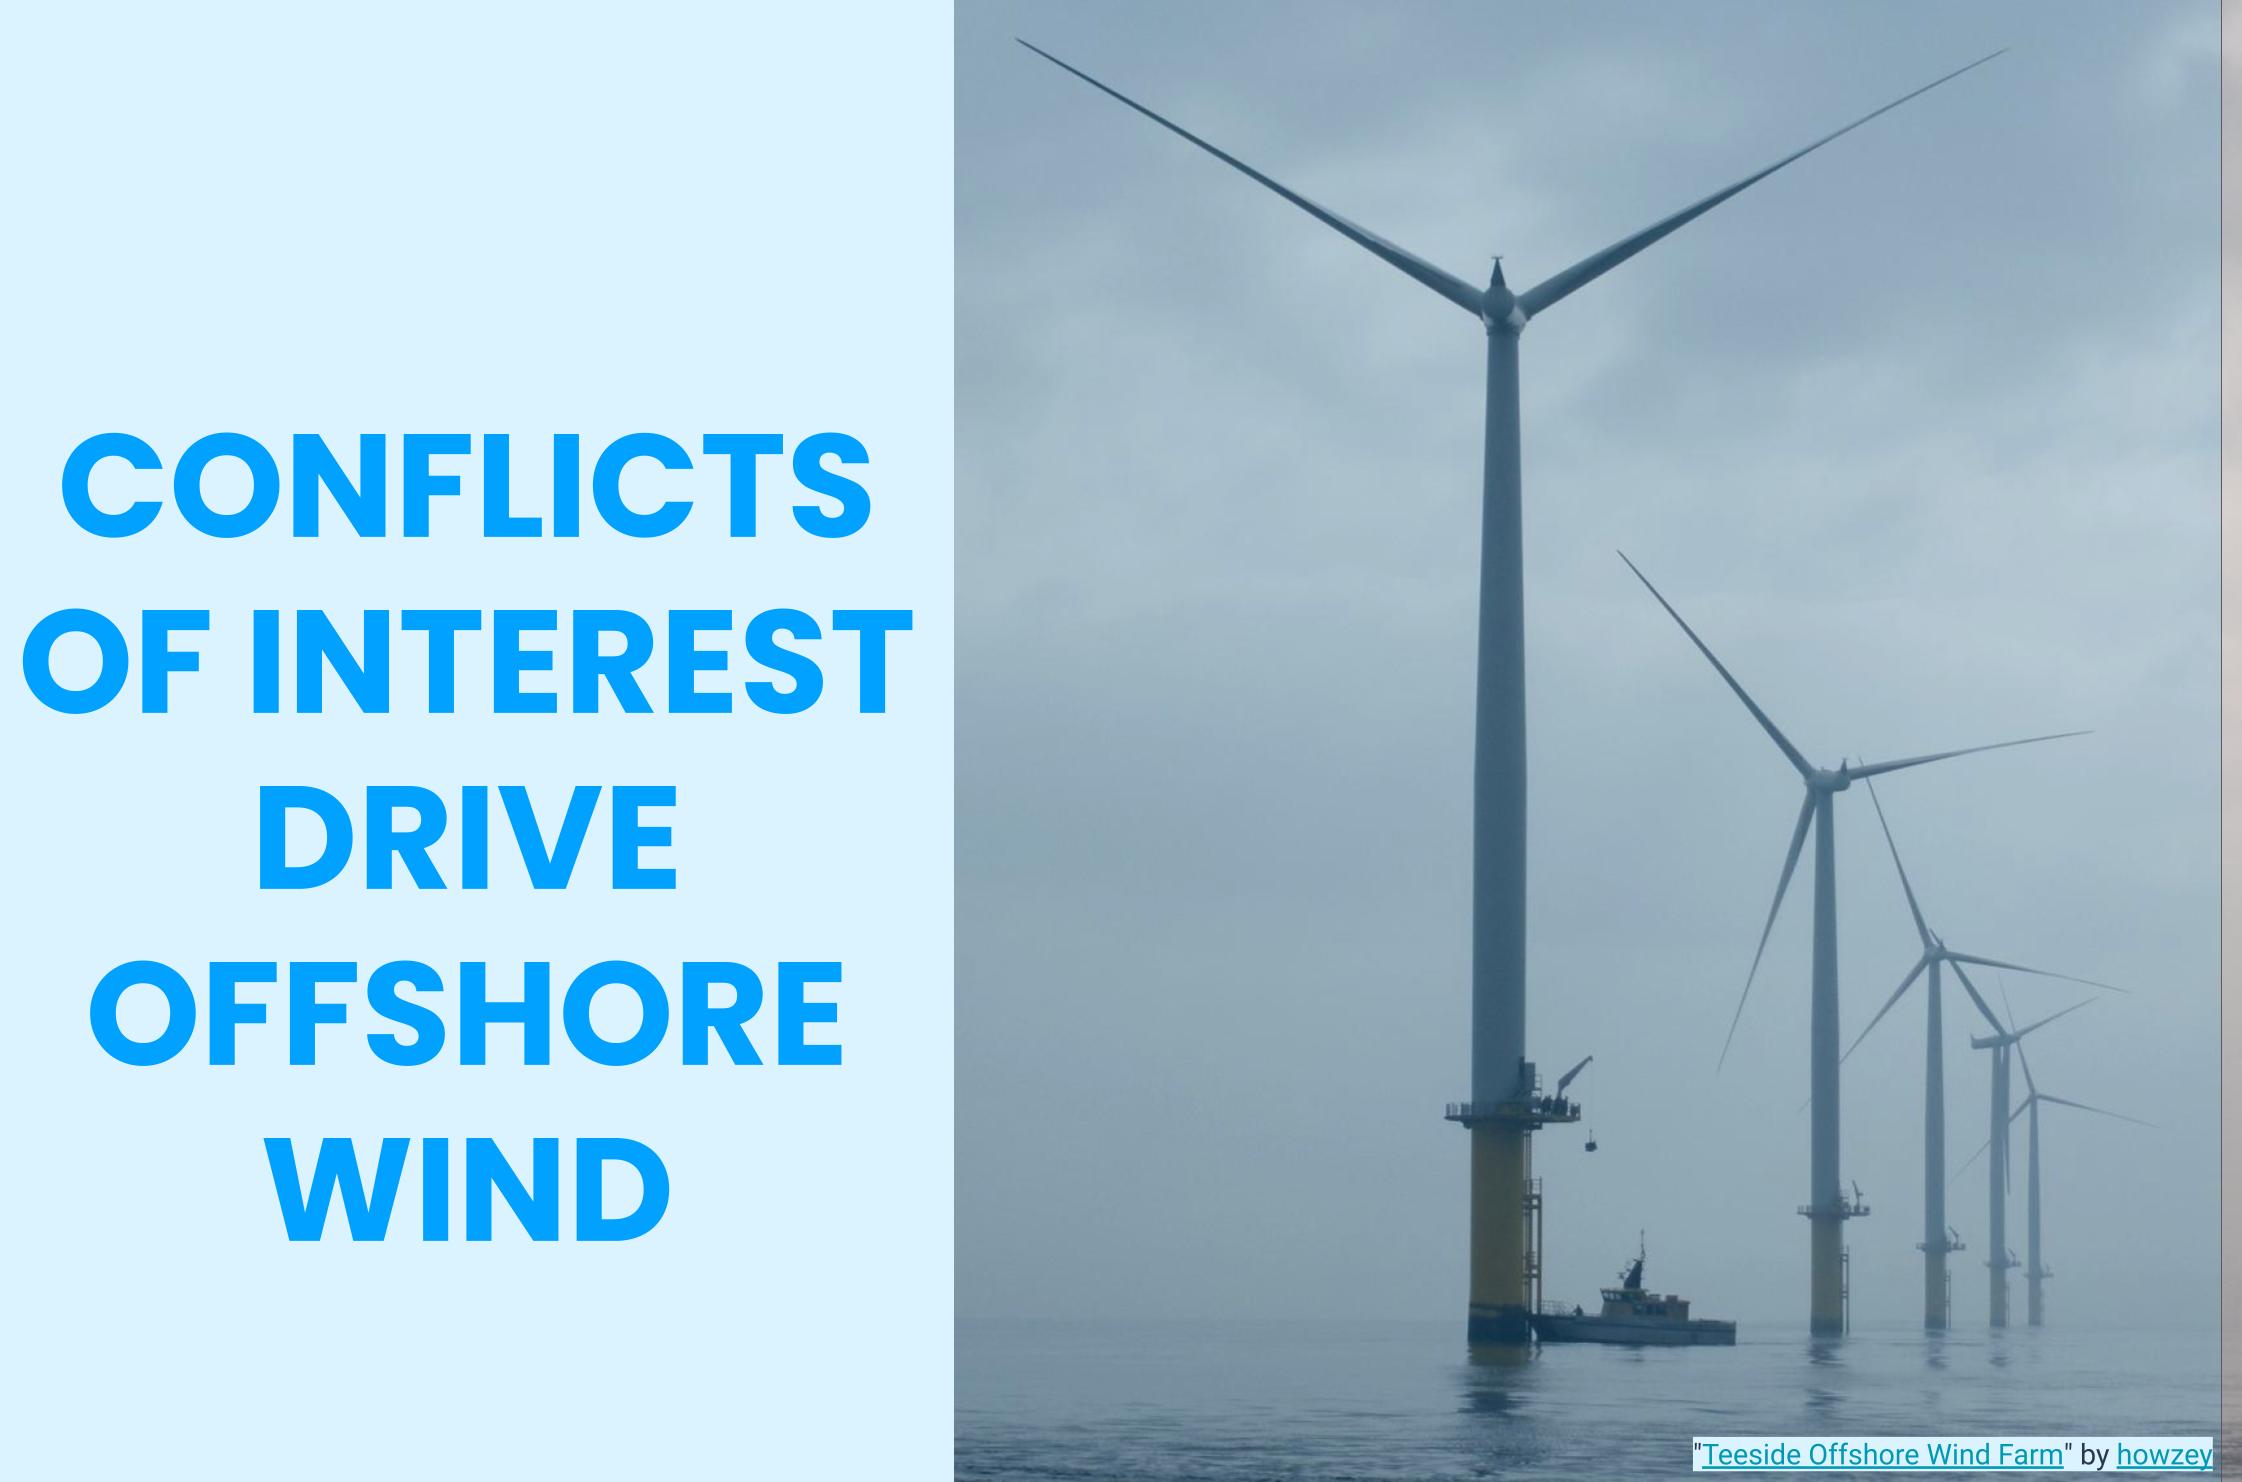 Title text set next to cloudy sky image of wind turbines with fishing boat sailing between them